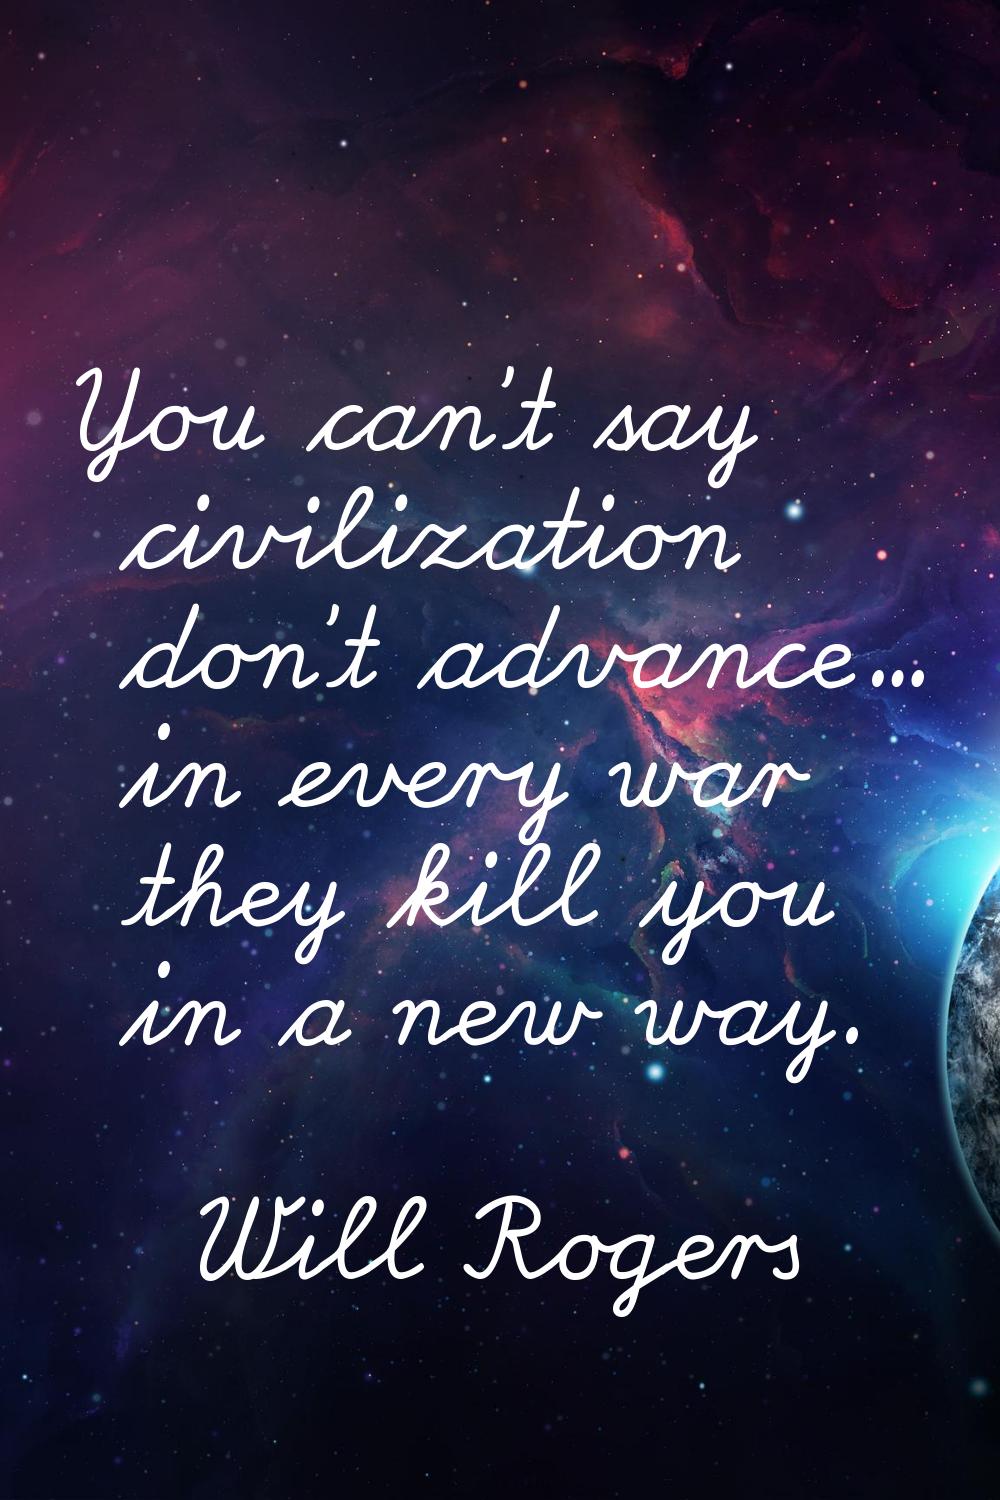 You can't say civilization don't advance... in every war they kill you in a new way.